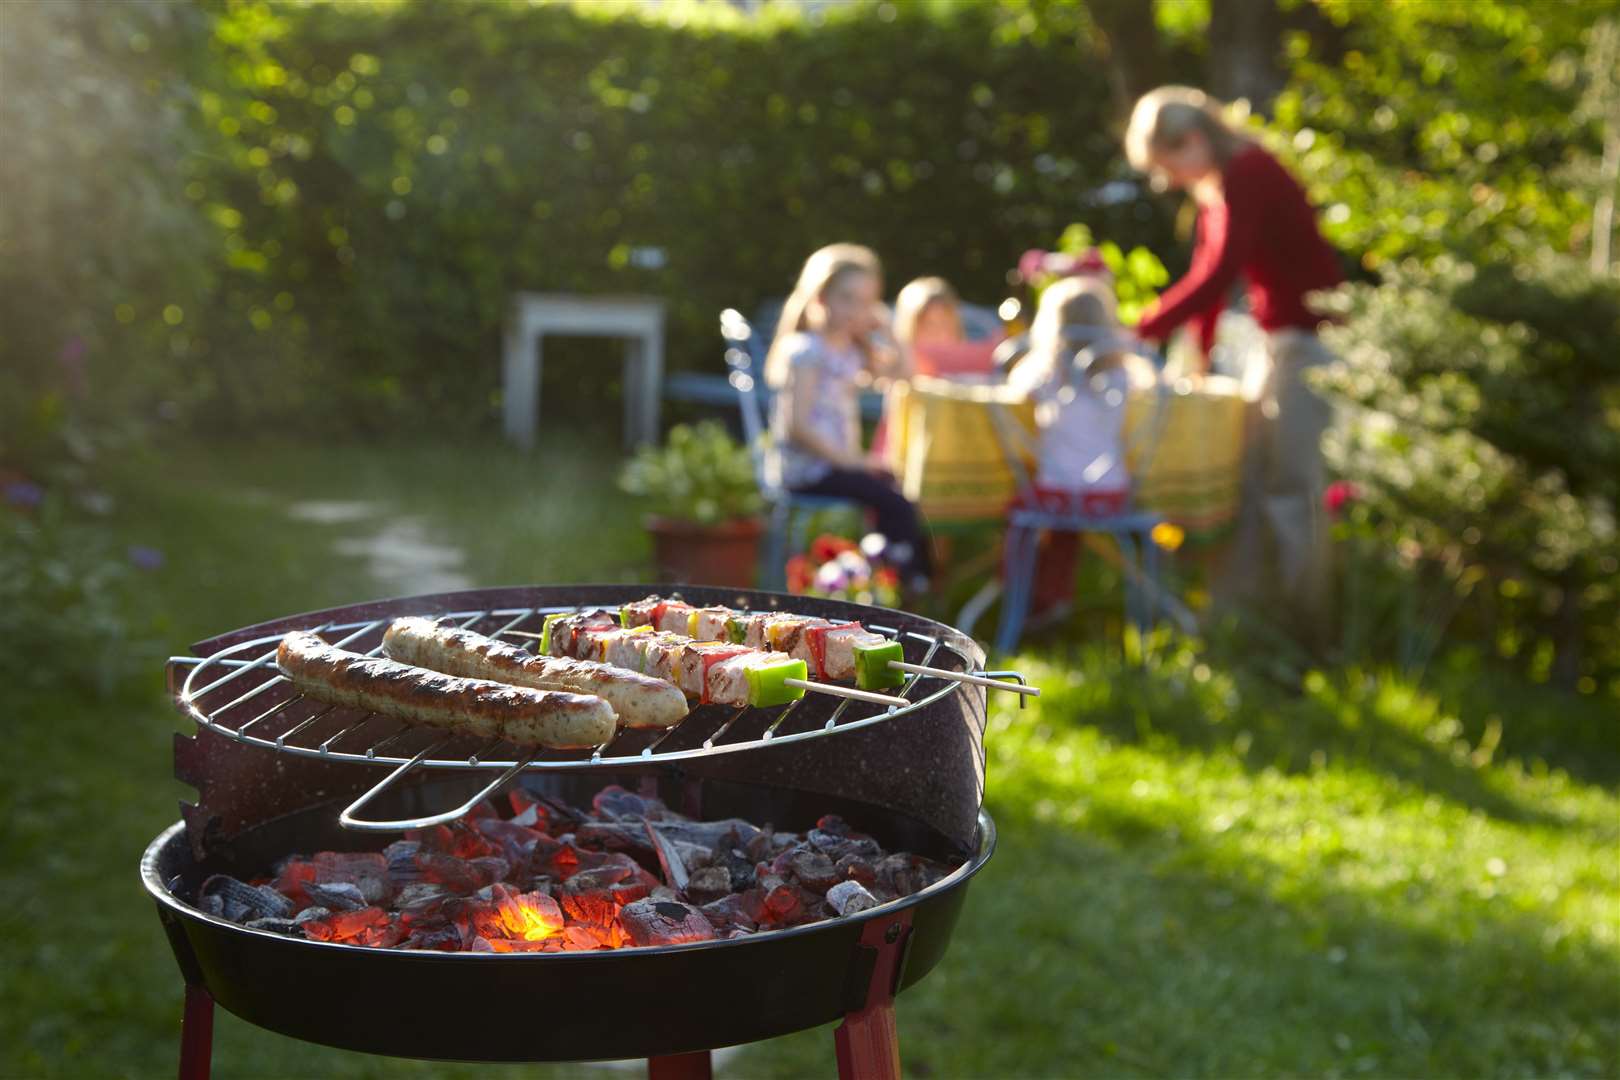 Firefighters are warning about barbecue and bonfire safety